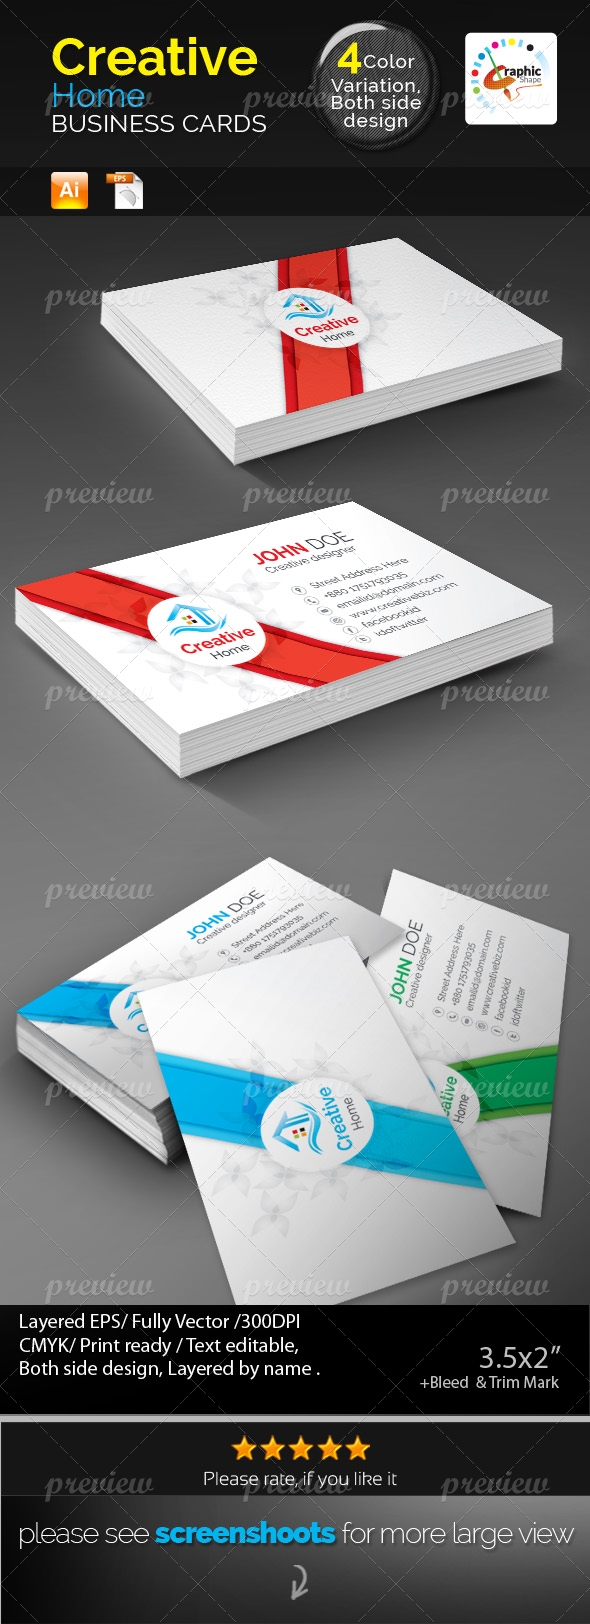 Creative Home Business Cards